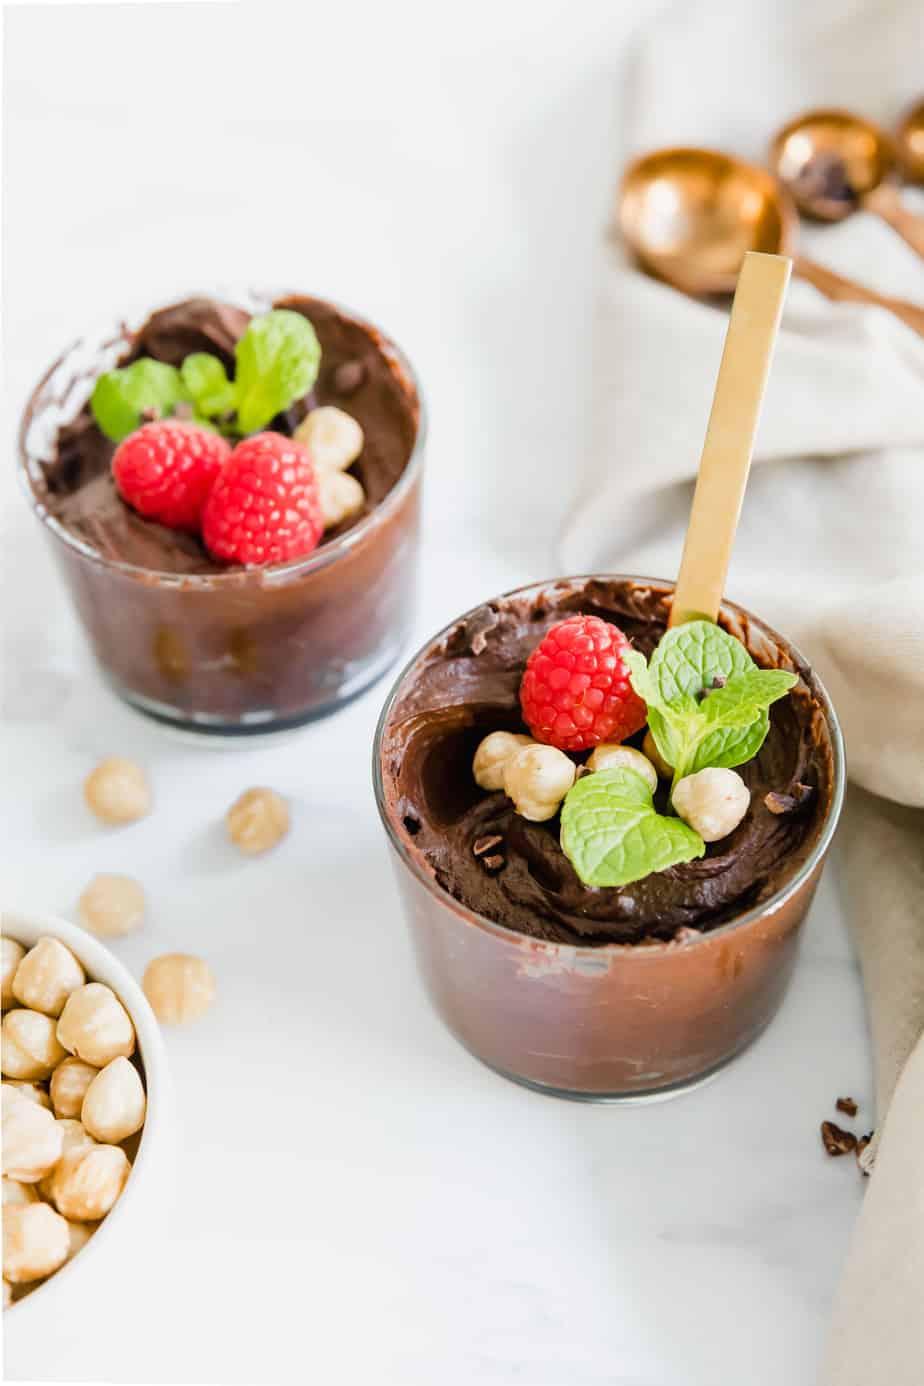 Chocolate mousse in glass serving dishes with berries and fresh mint.